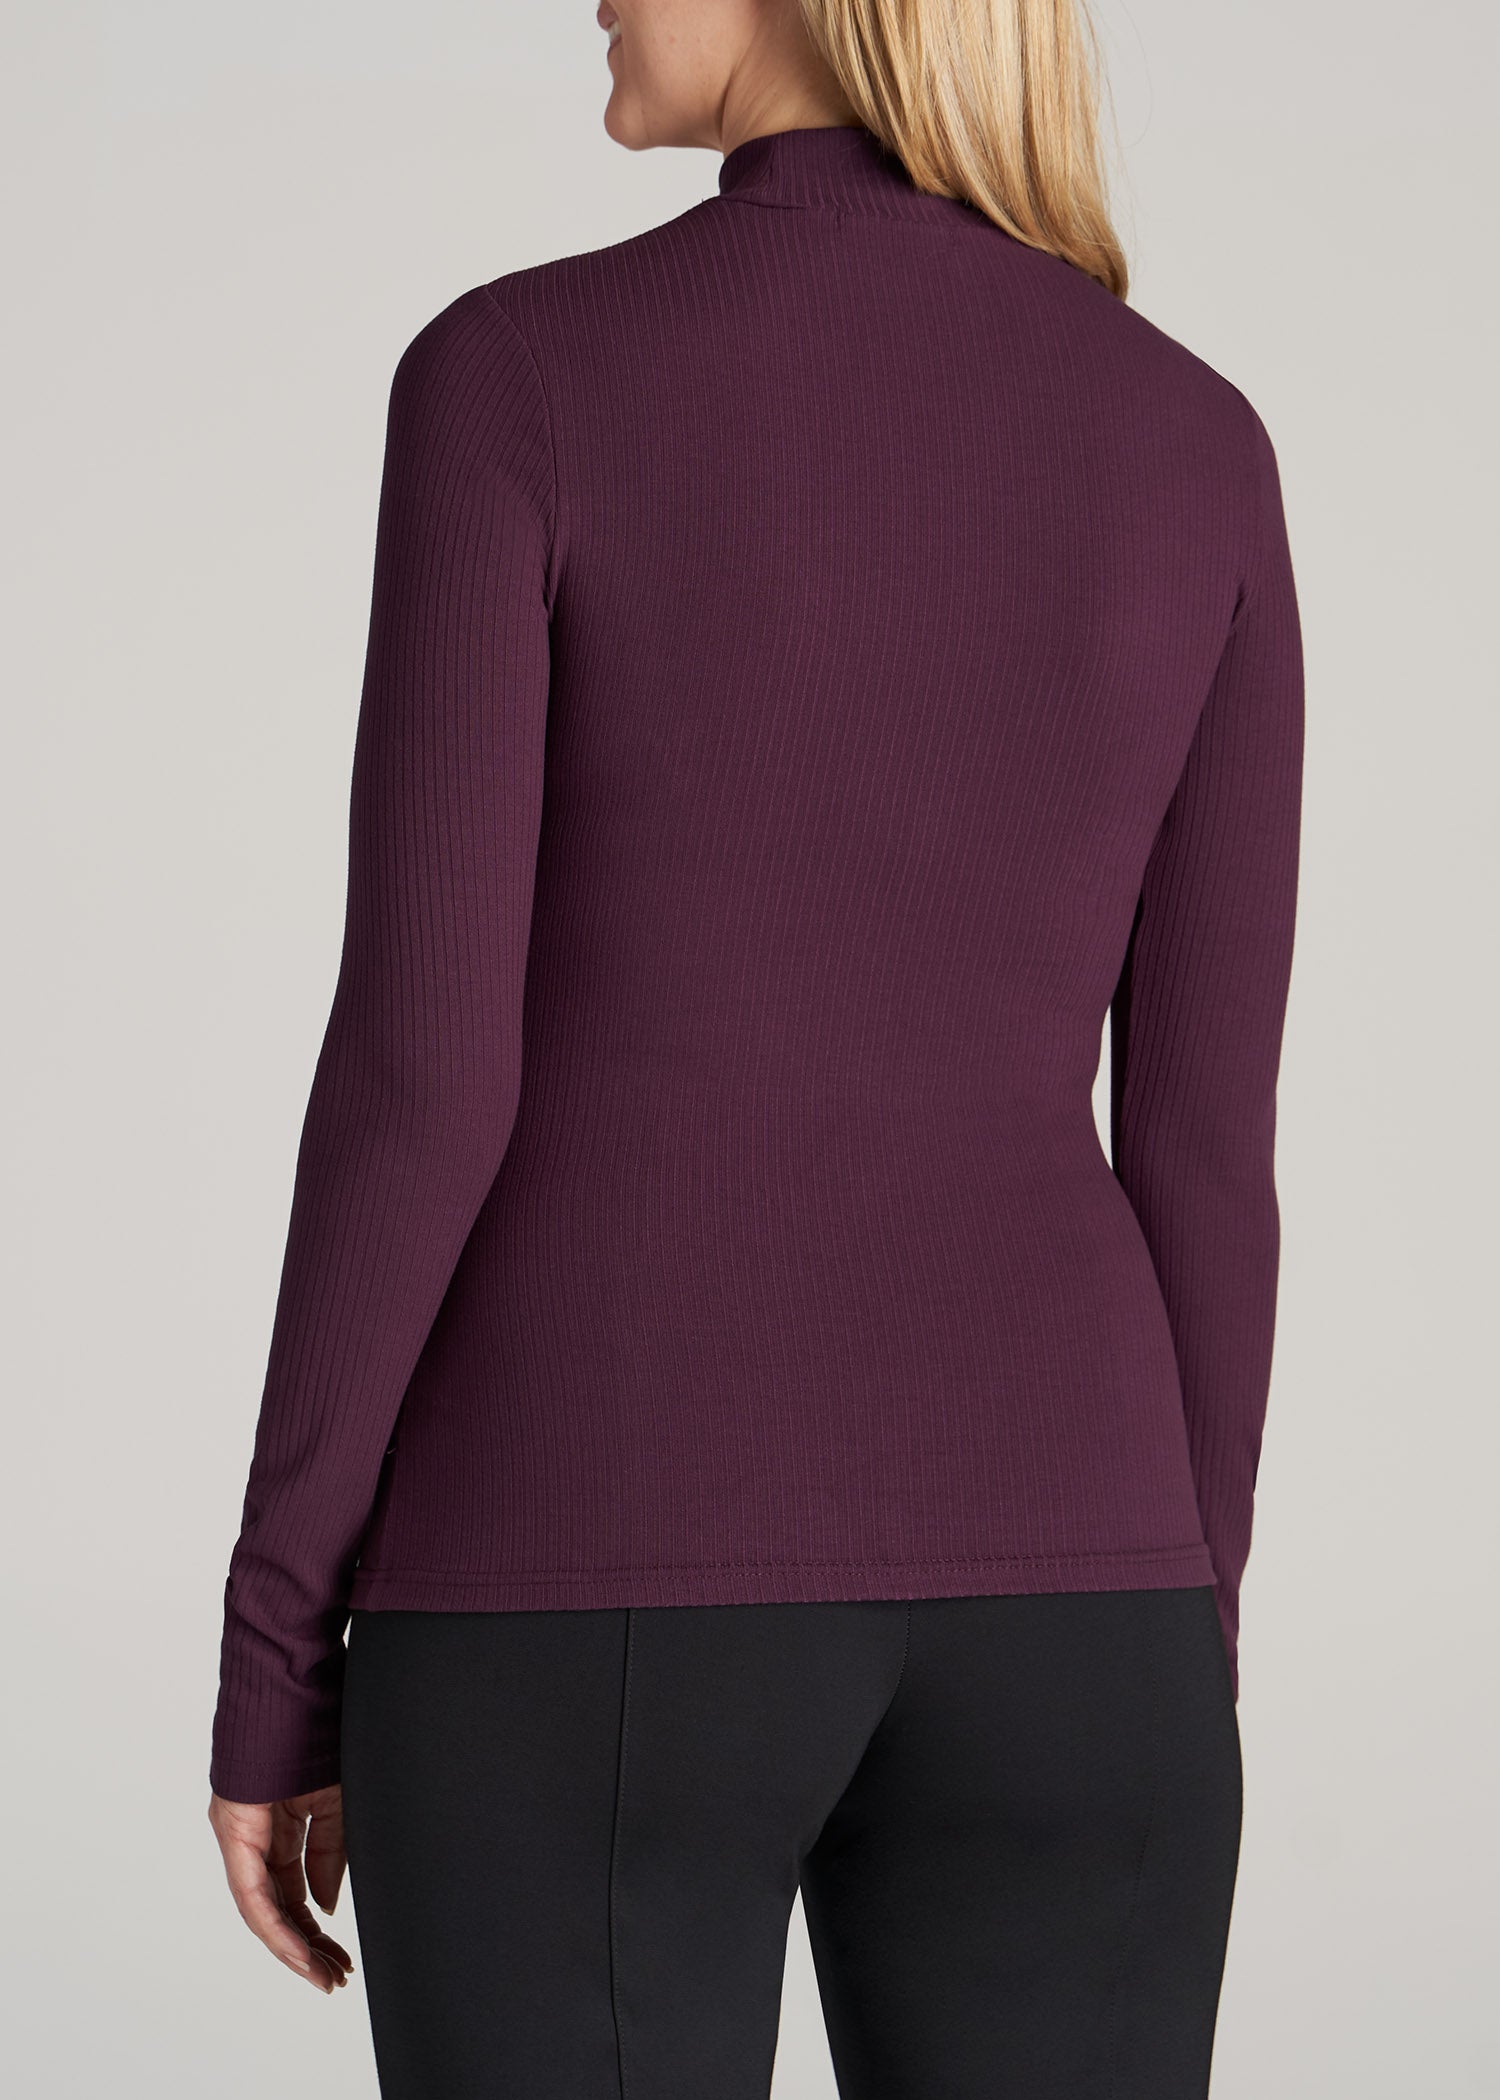    American-Tall-Women-LS-Mock-Neck-Ribbed-Top-Maroon-back